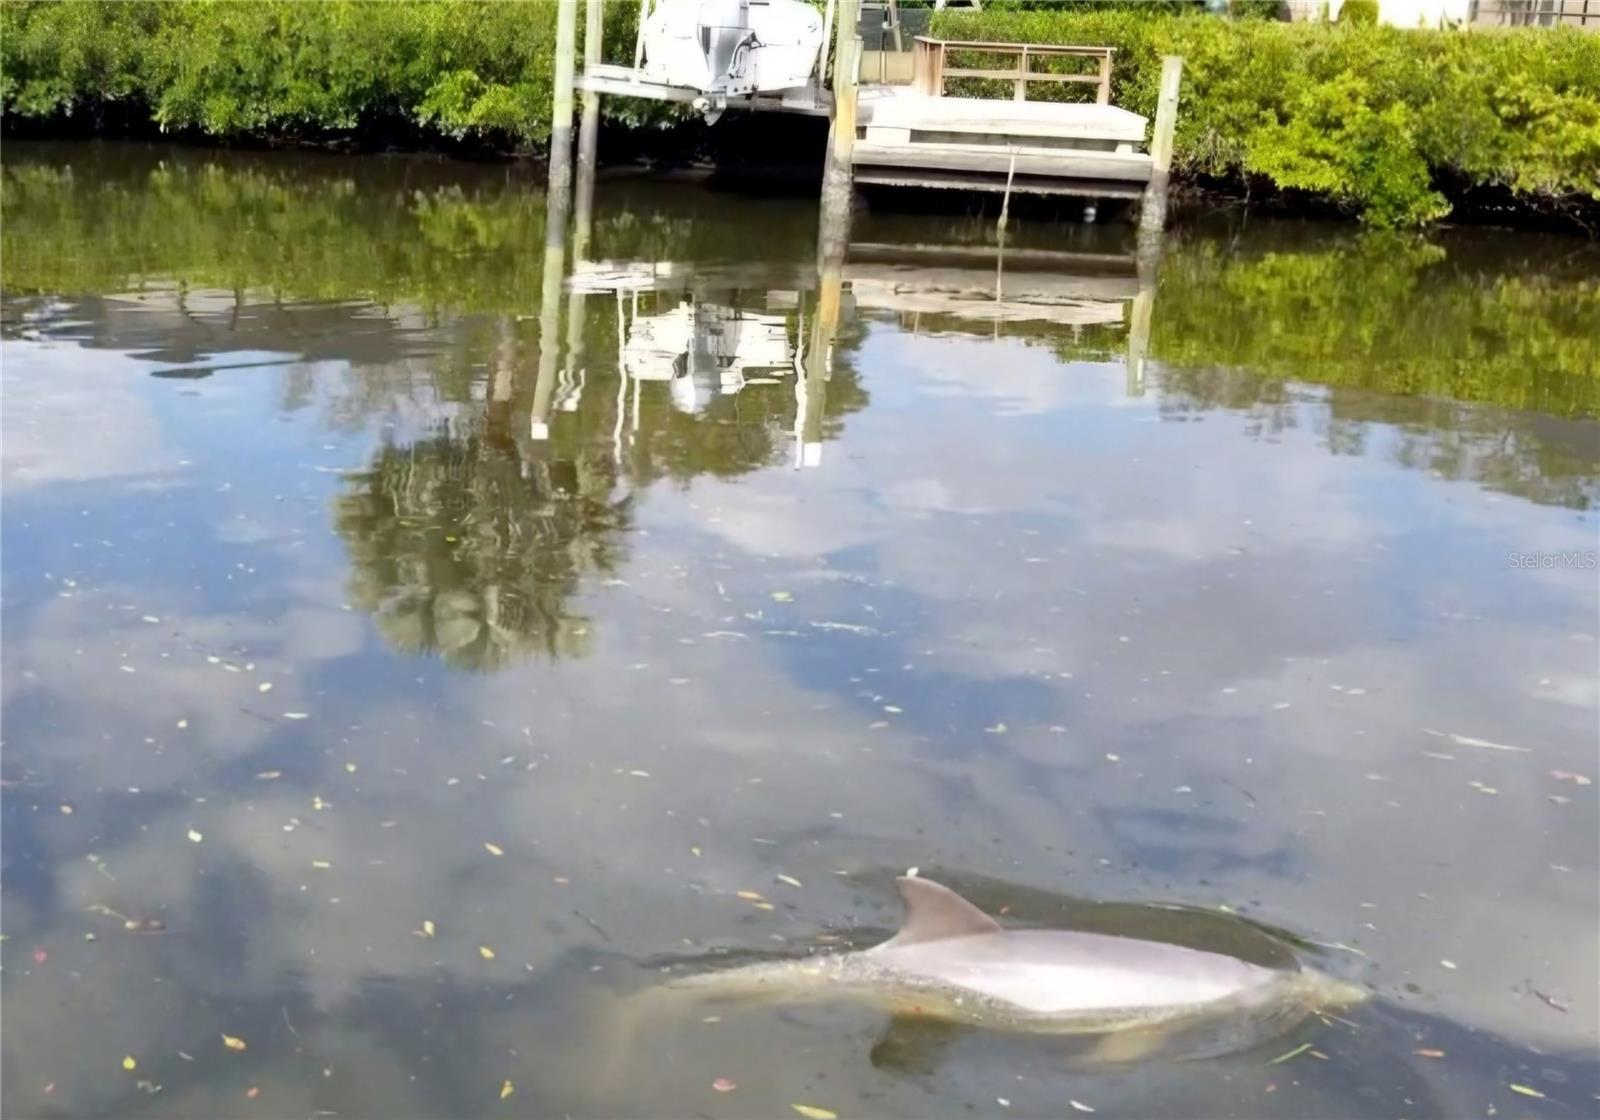 Dolphins at play right off your dock!